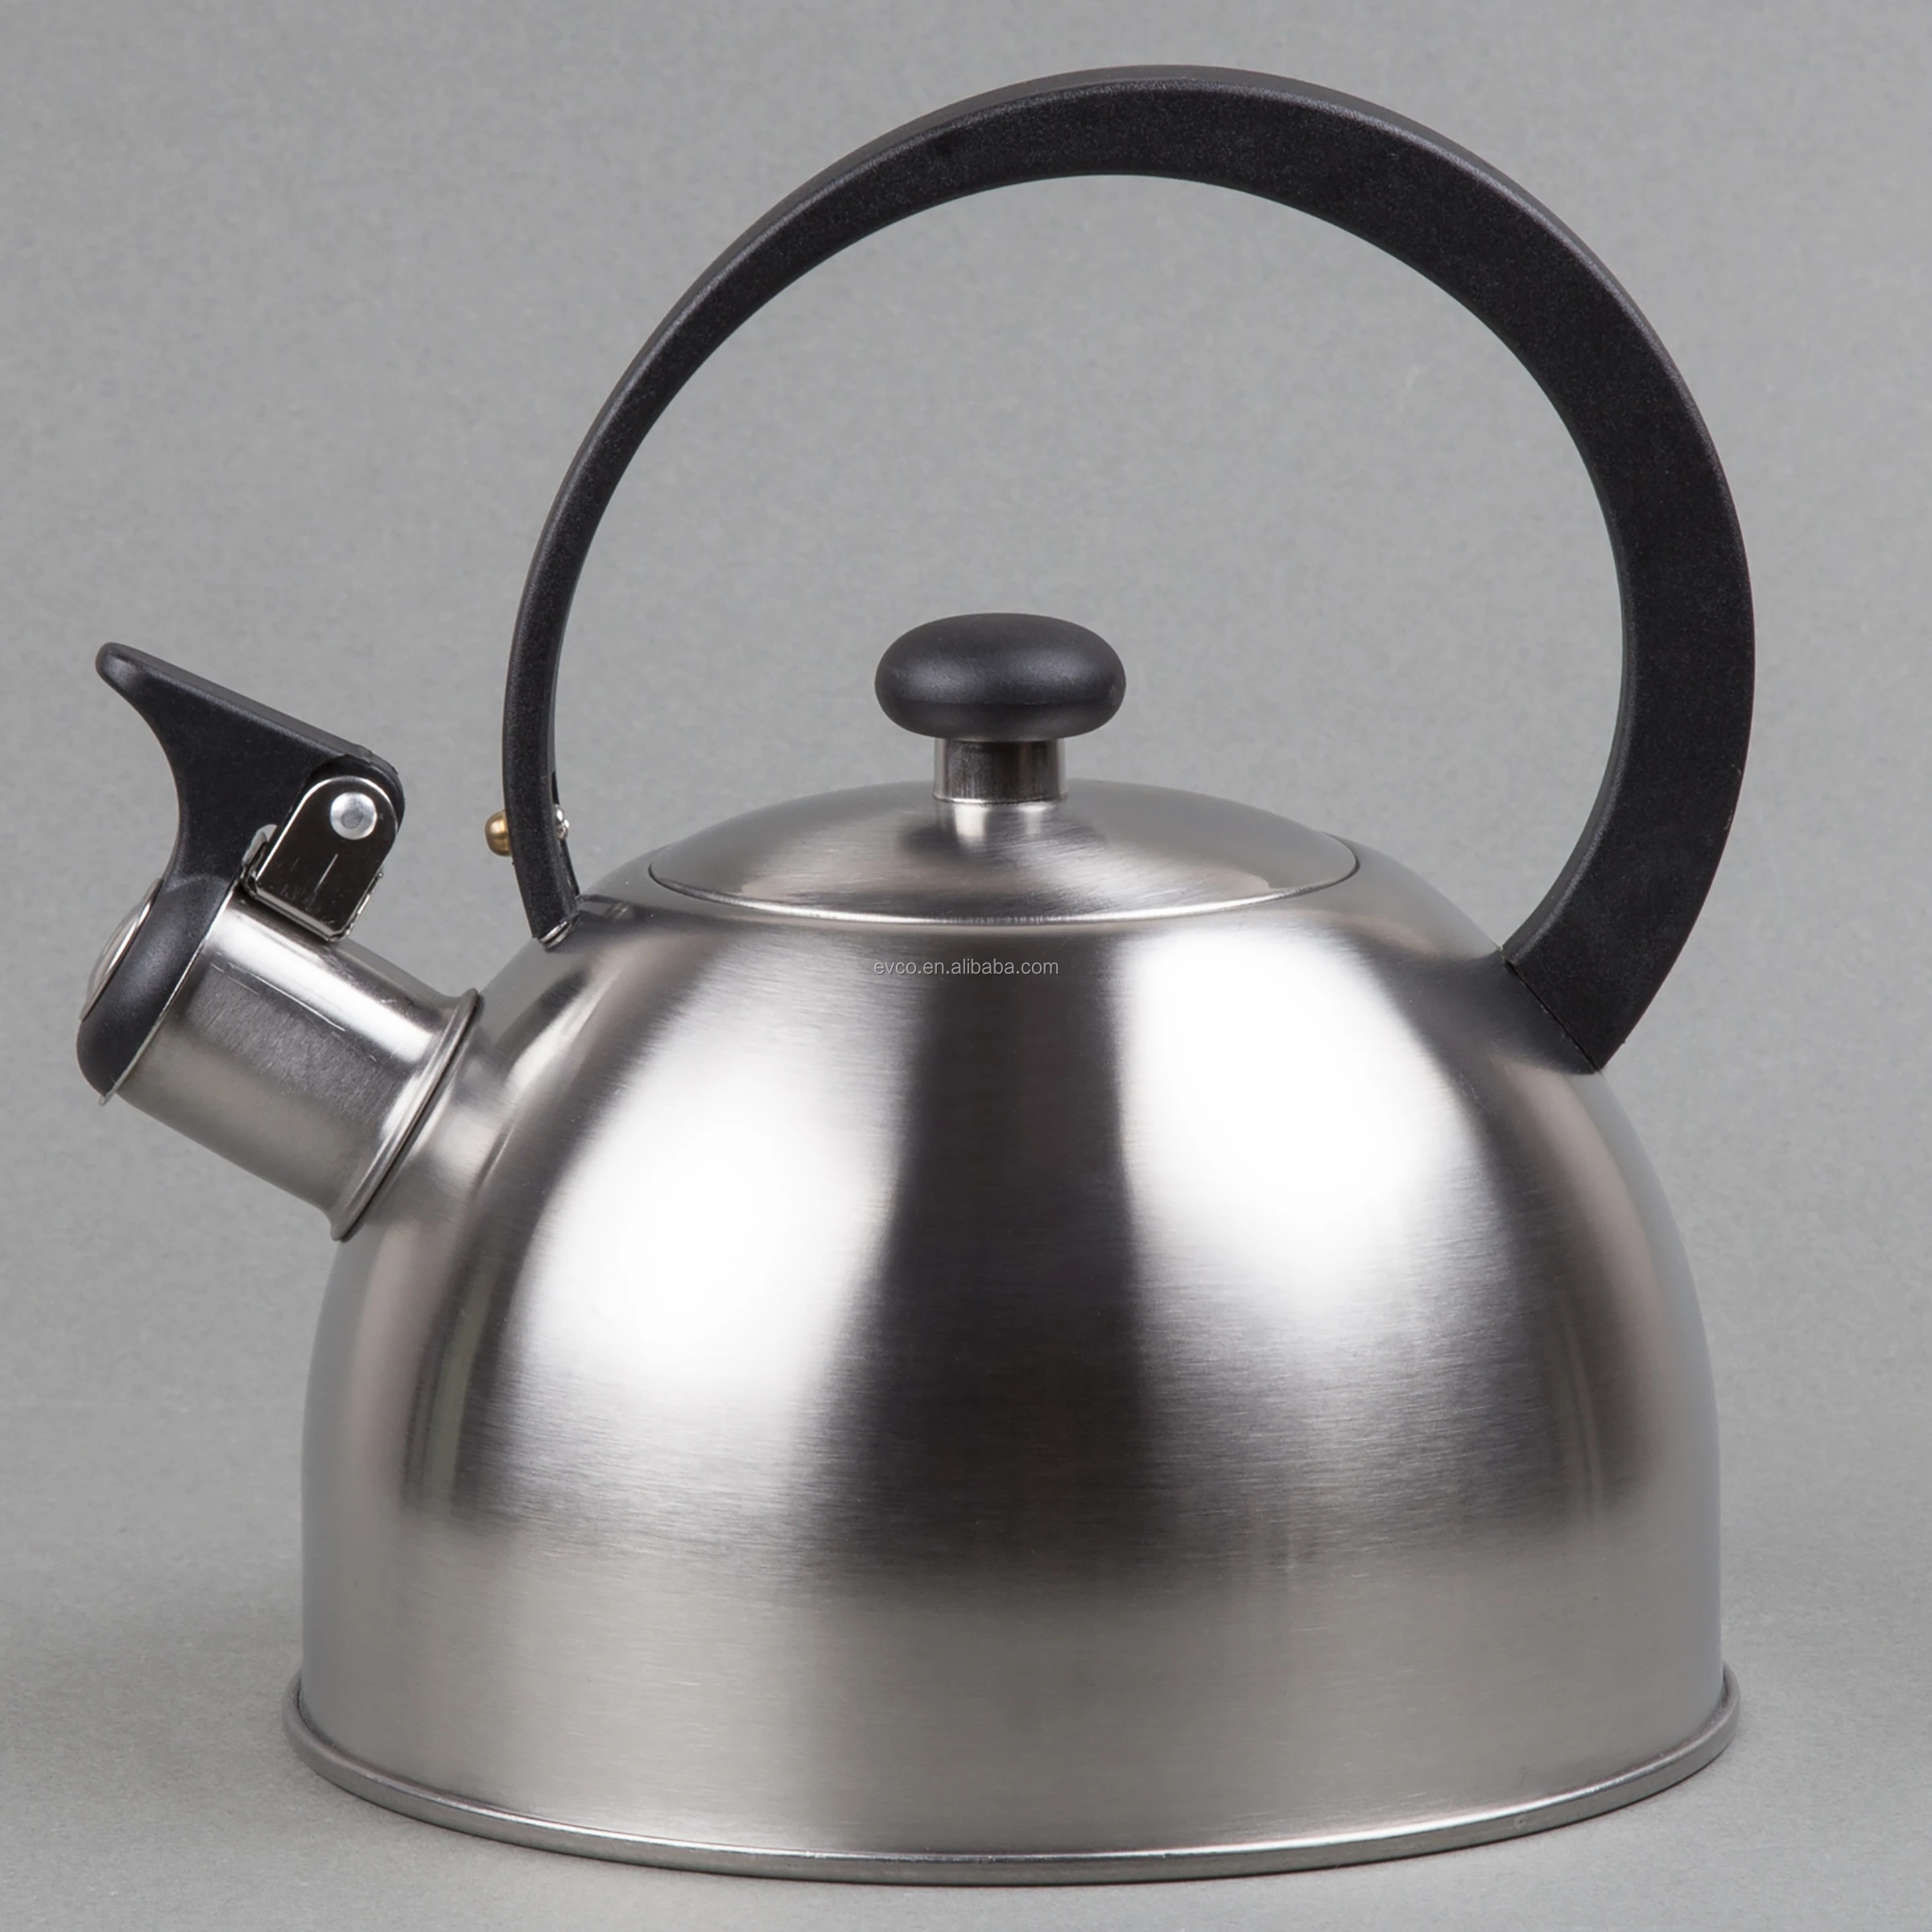 https://img2.tradewheel.com/uploads/images/products/6/0/prelude-21-qt-stainless-steel-whistling-tea-kettle-all-stainless-steel1-0183401001633697178.jpg.webp